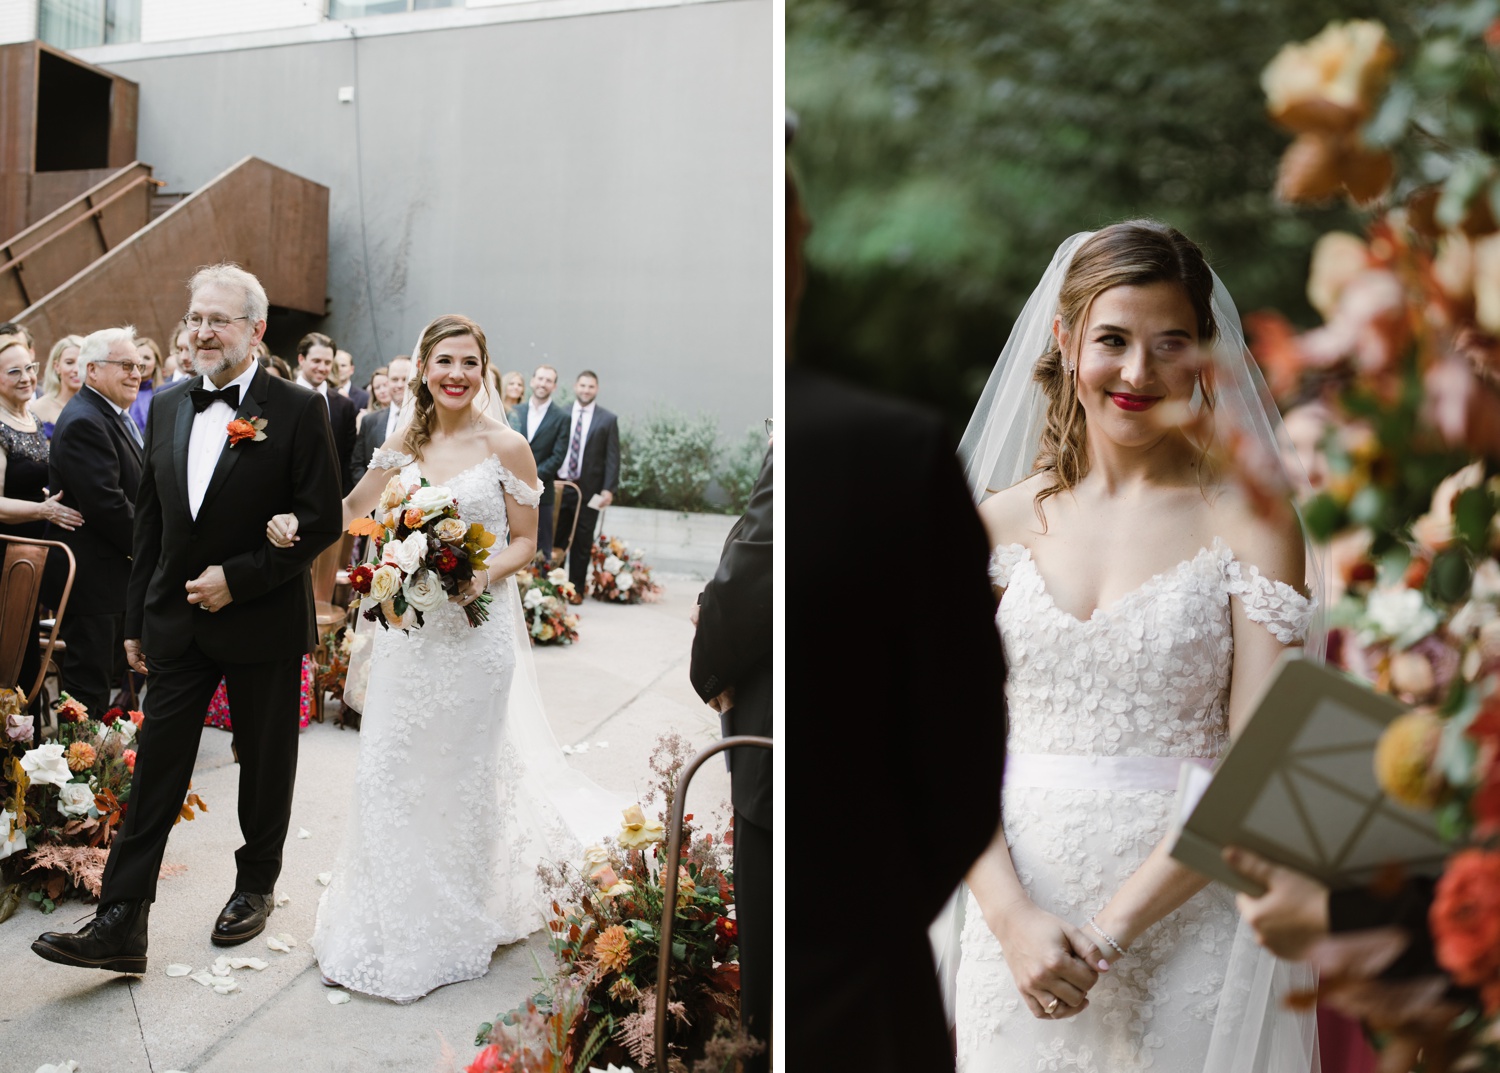 Outdoor ceremony for a fall wedding in Austin